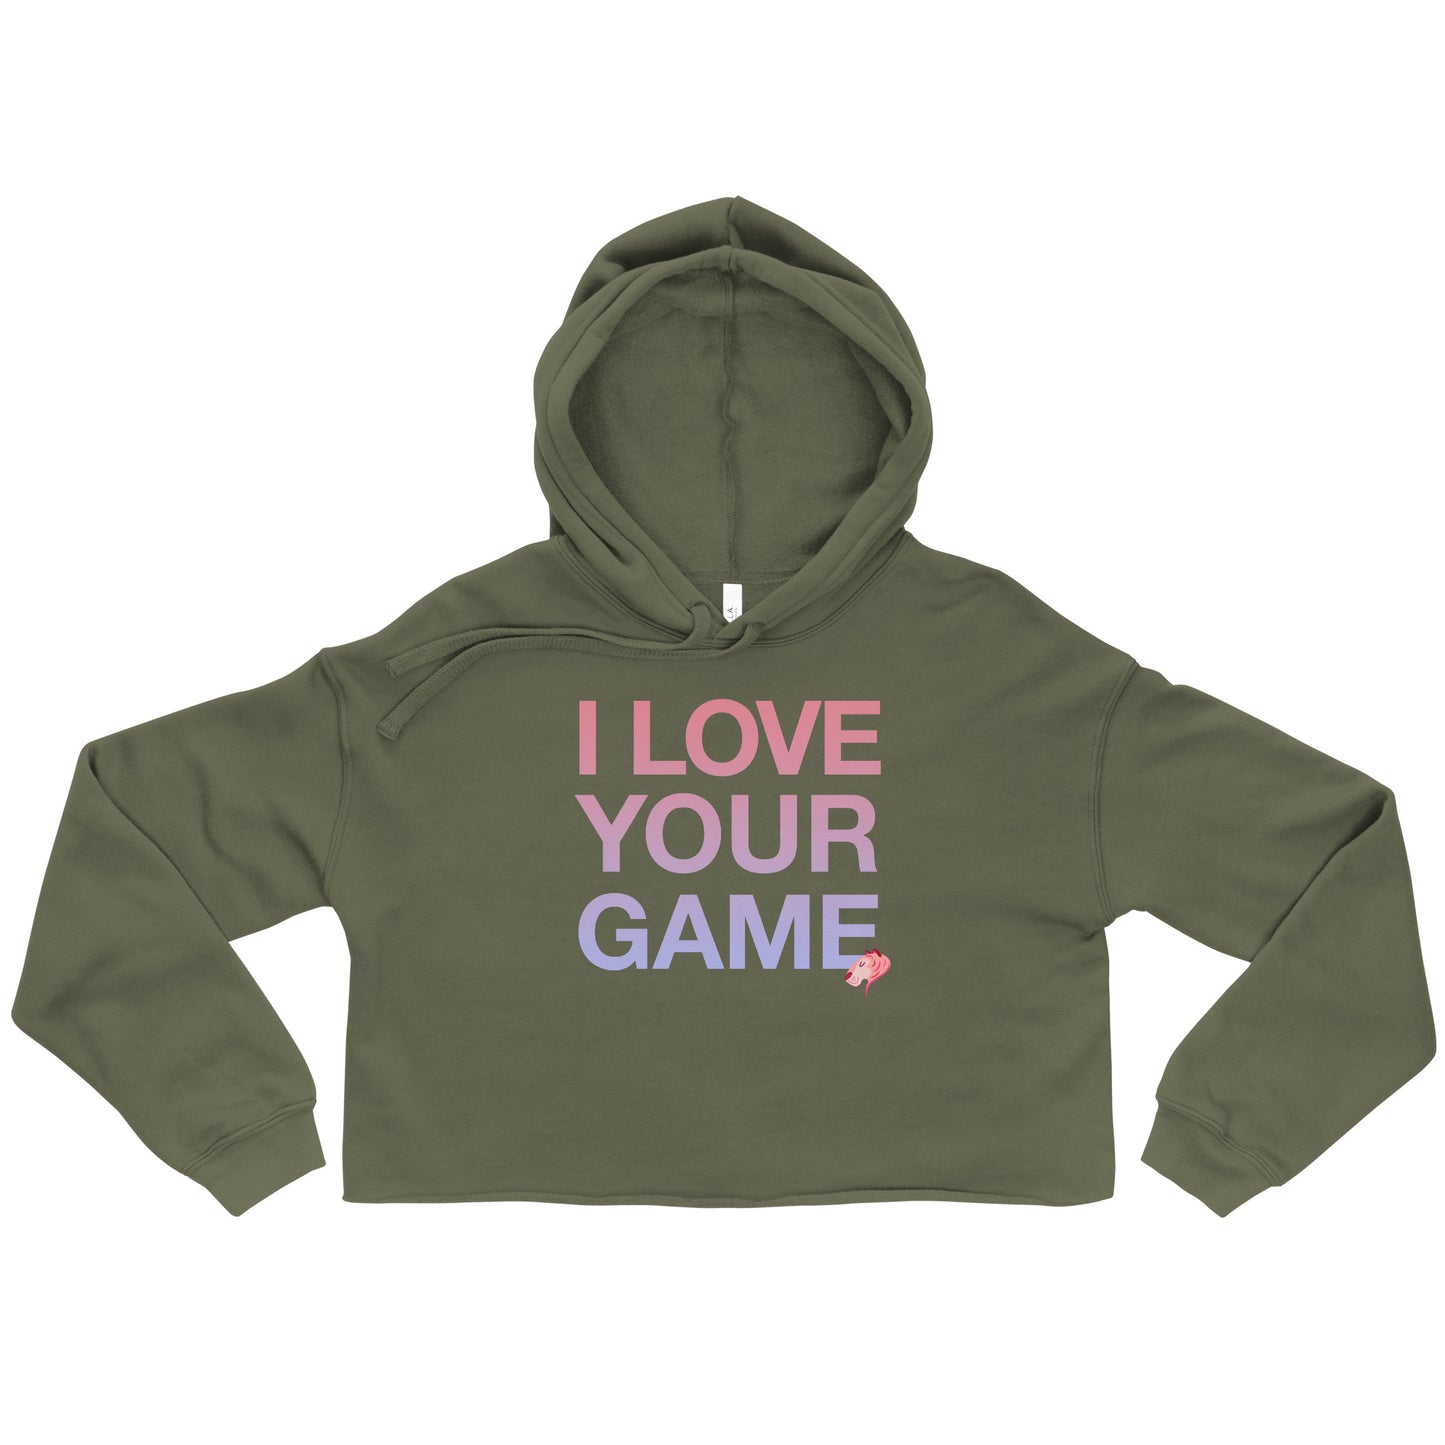 I LOVE YOUR GAME Crop Hoodie